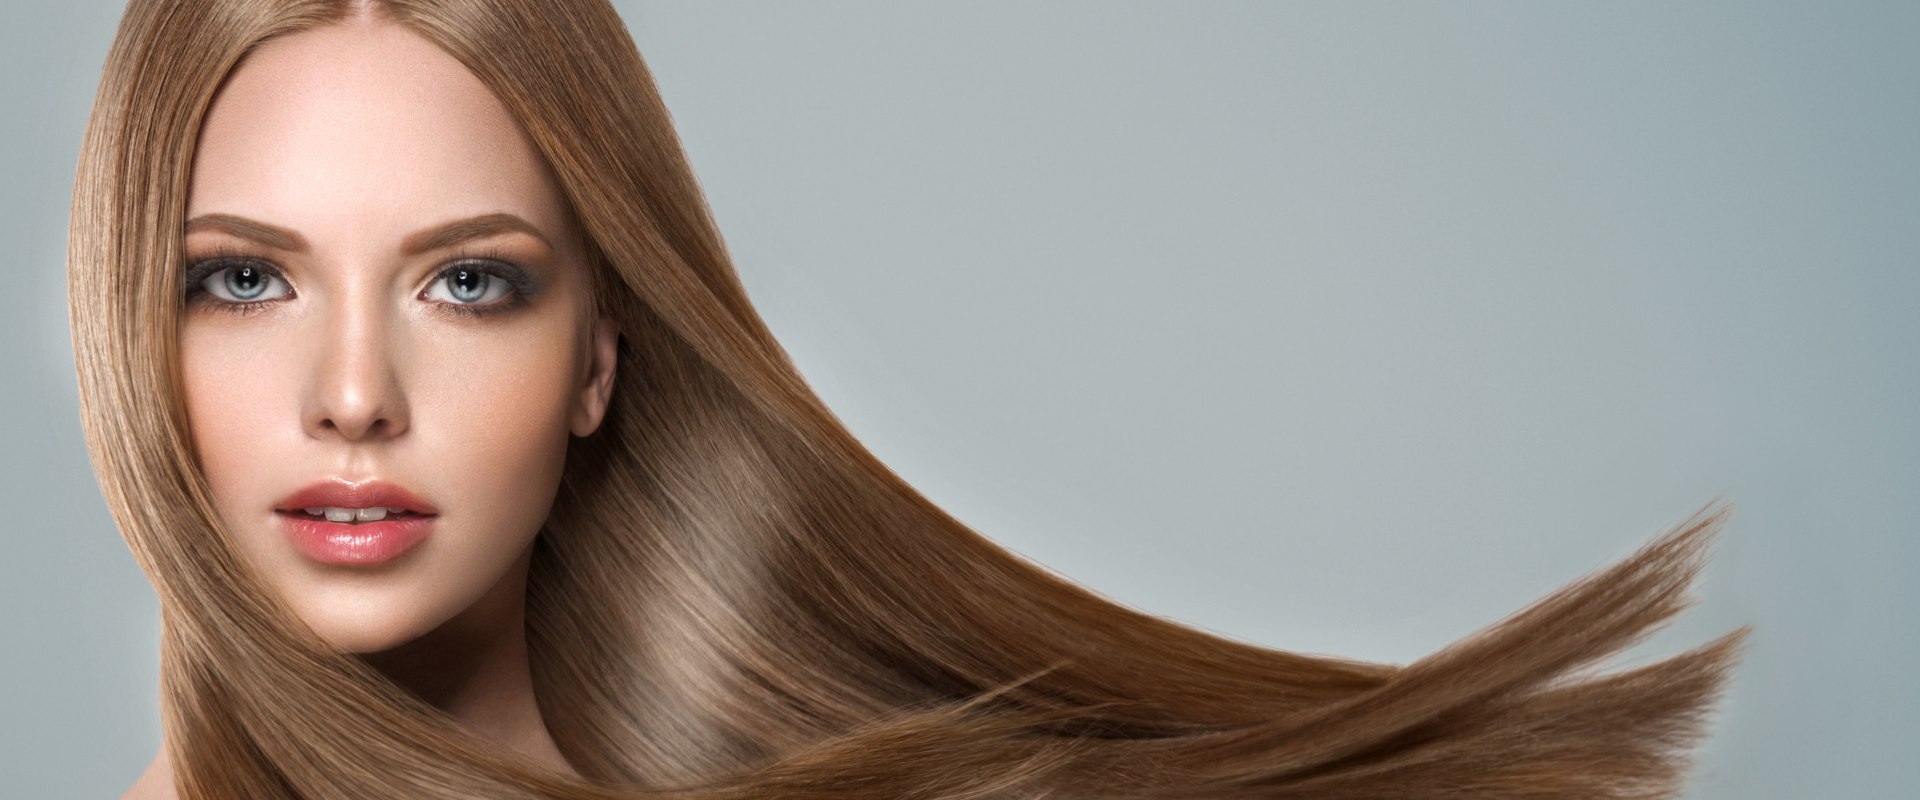 Hair Botox London: How Long Does It Take to See Results?